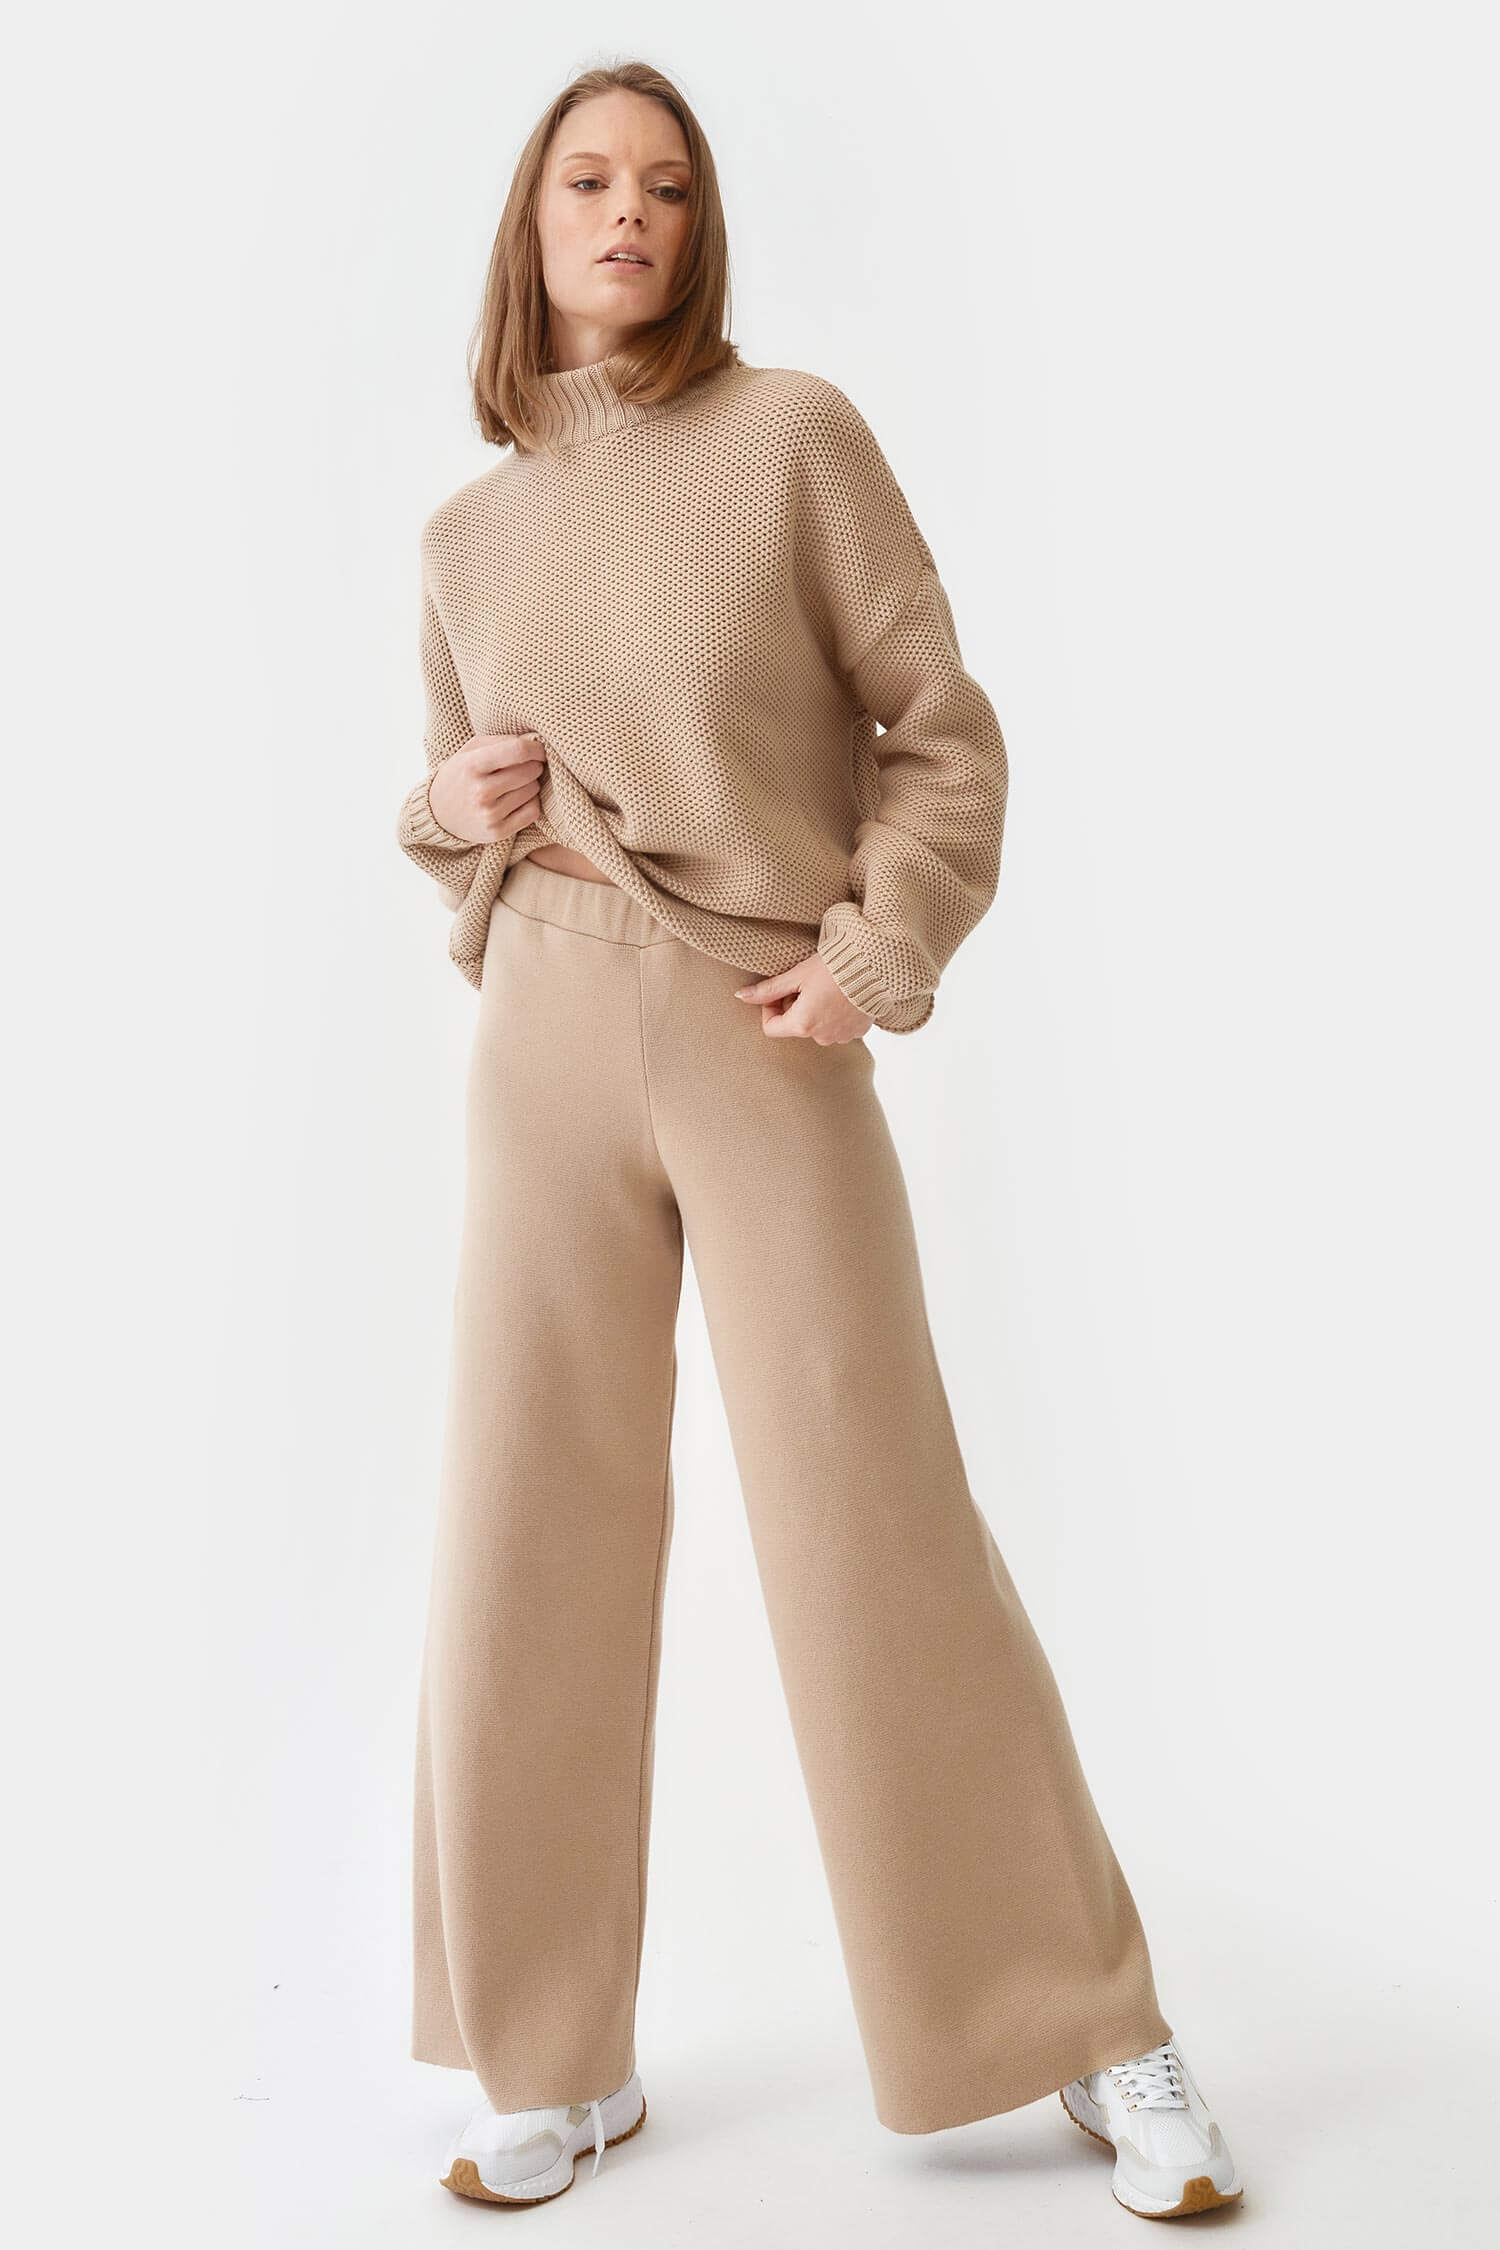 WHITE CONTRAST PANEL KNITTED TROUSERS | BOTTOMWEAR | COUGAR | MODJEN FOR  THE MODERN GENERATION | Modjen - For the modern Generation